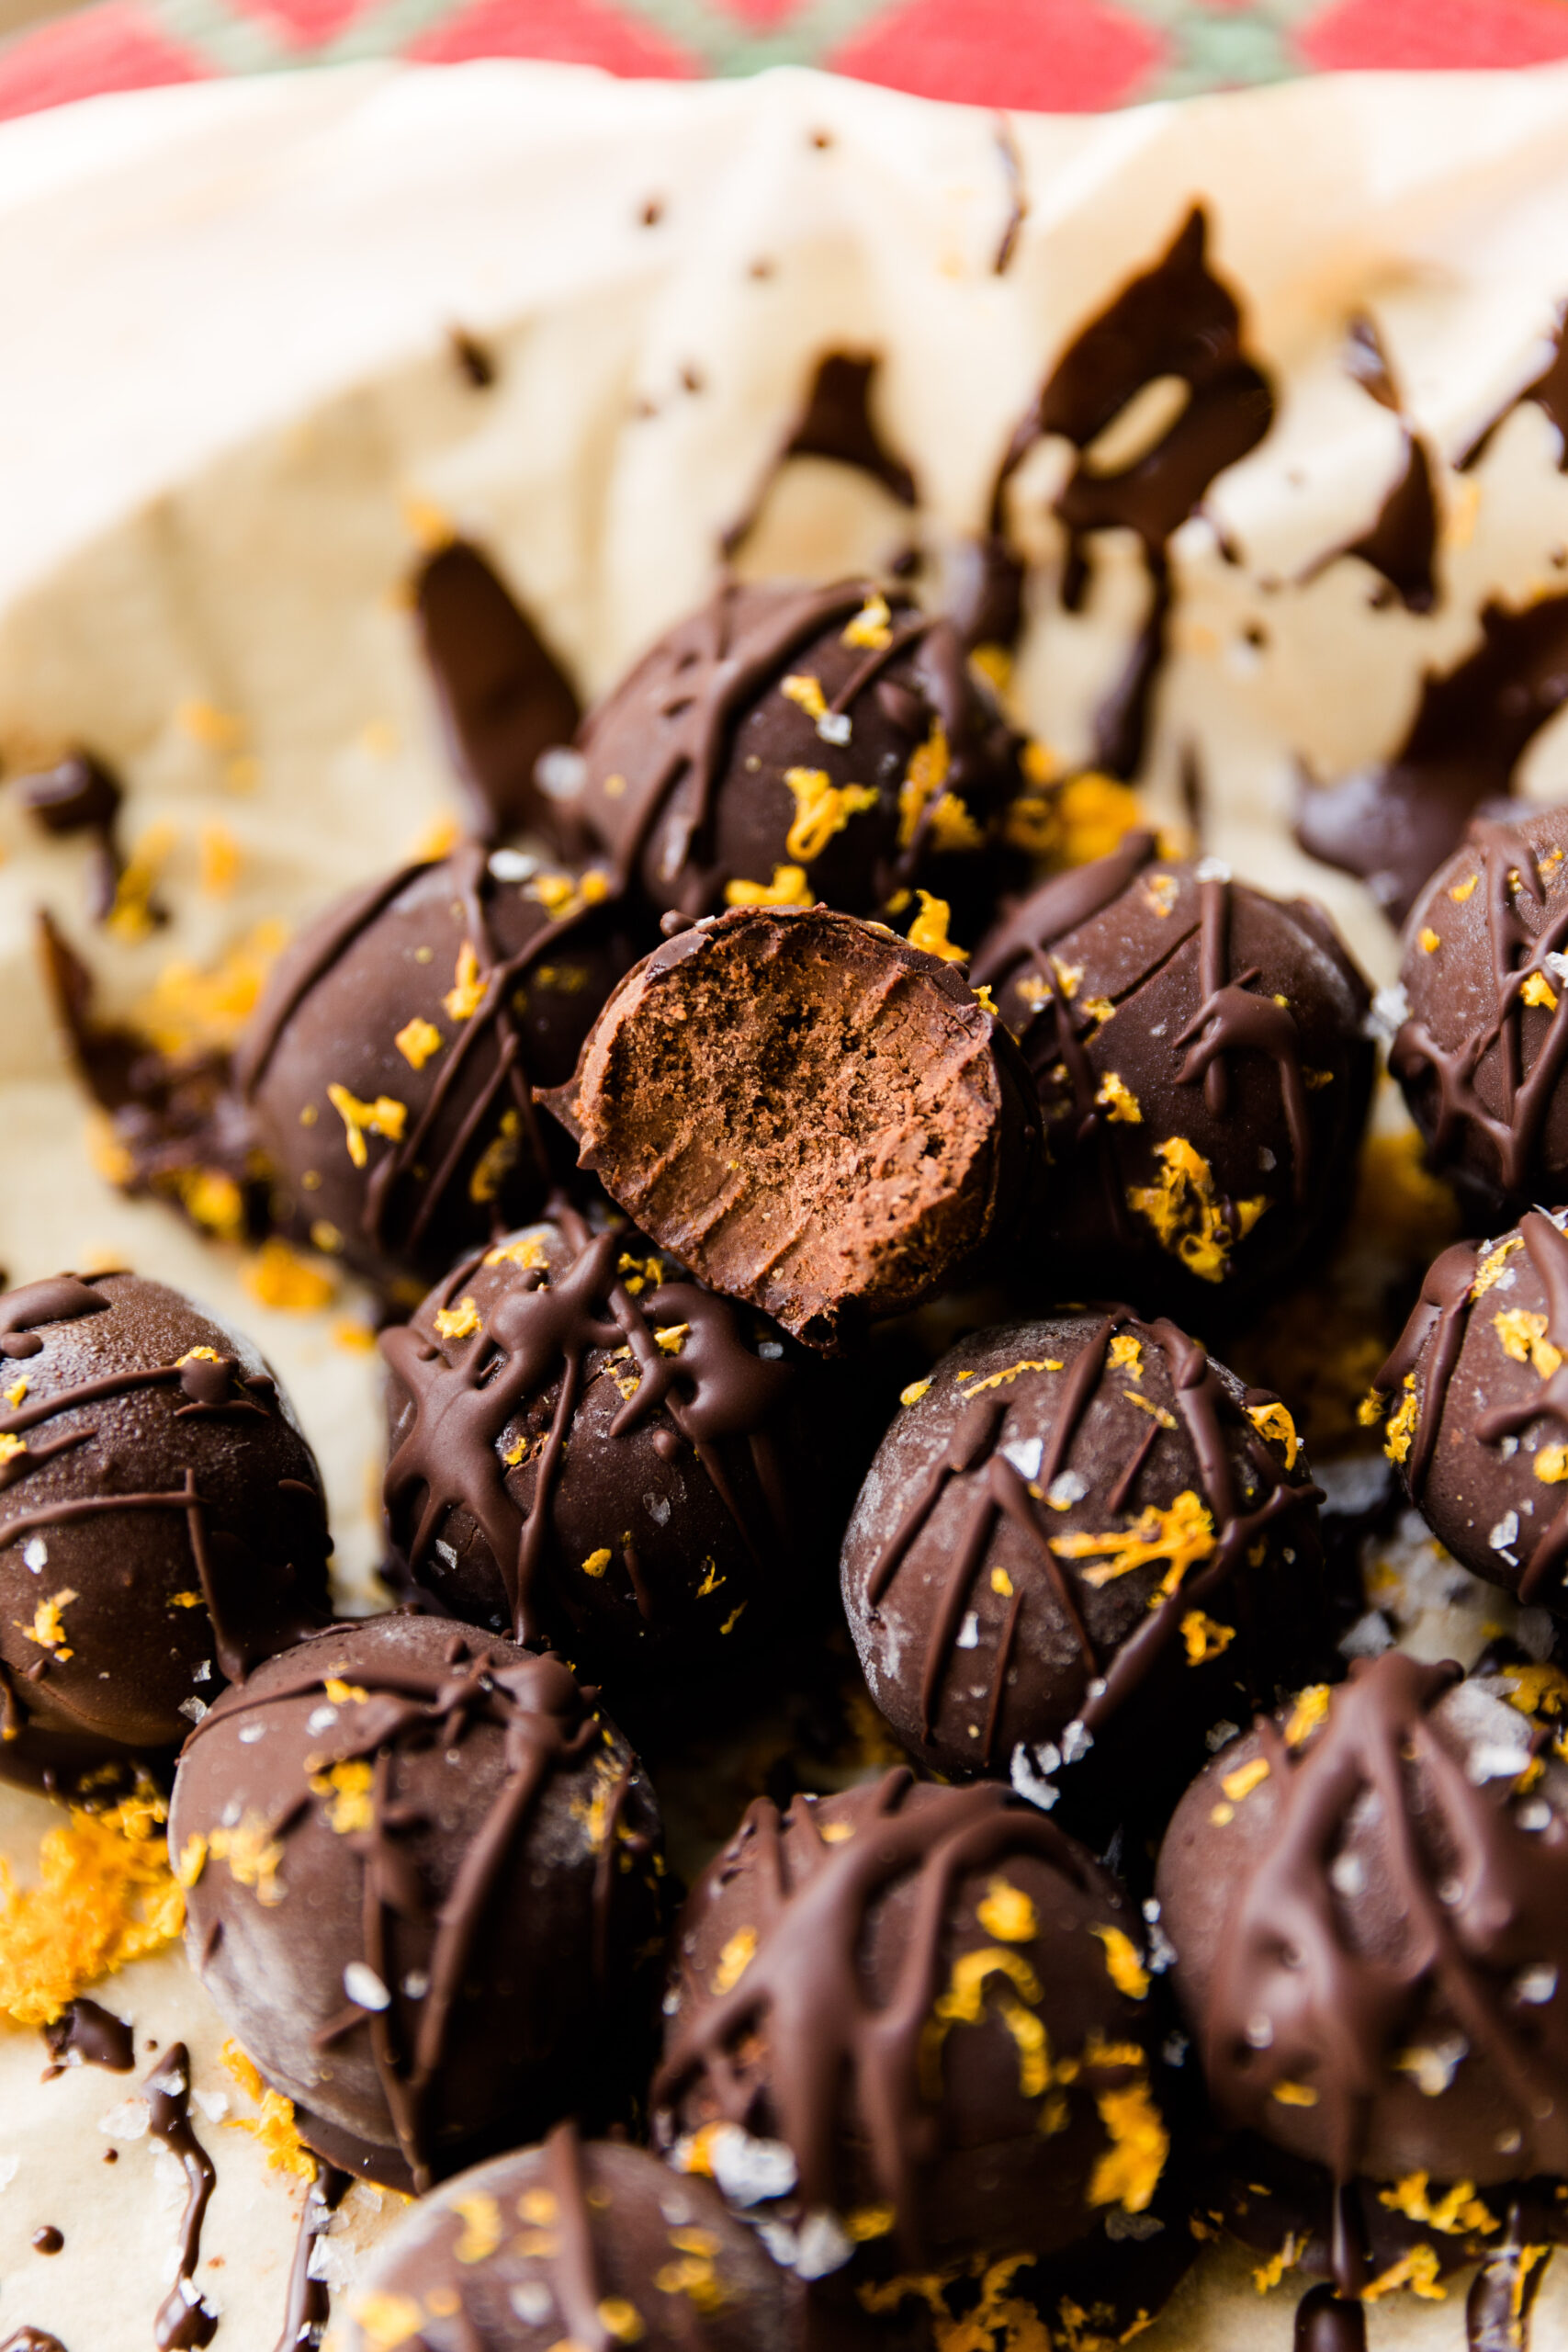 Chocolate orange truffles with a bite taken out of the one placed on top.